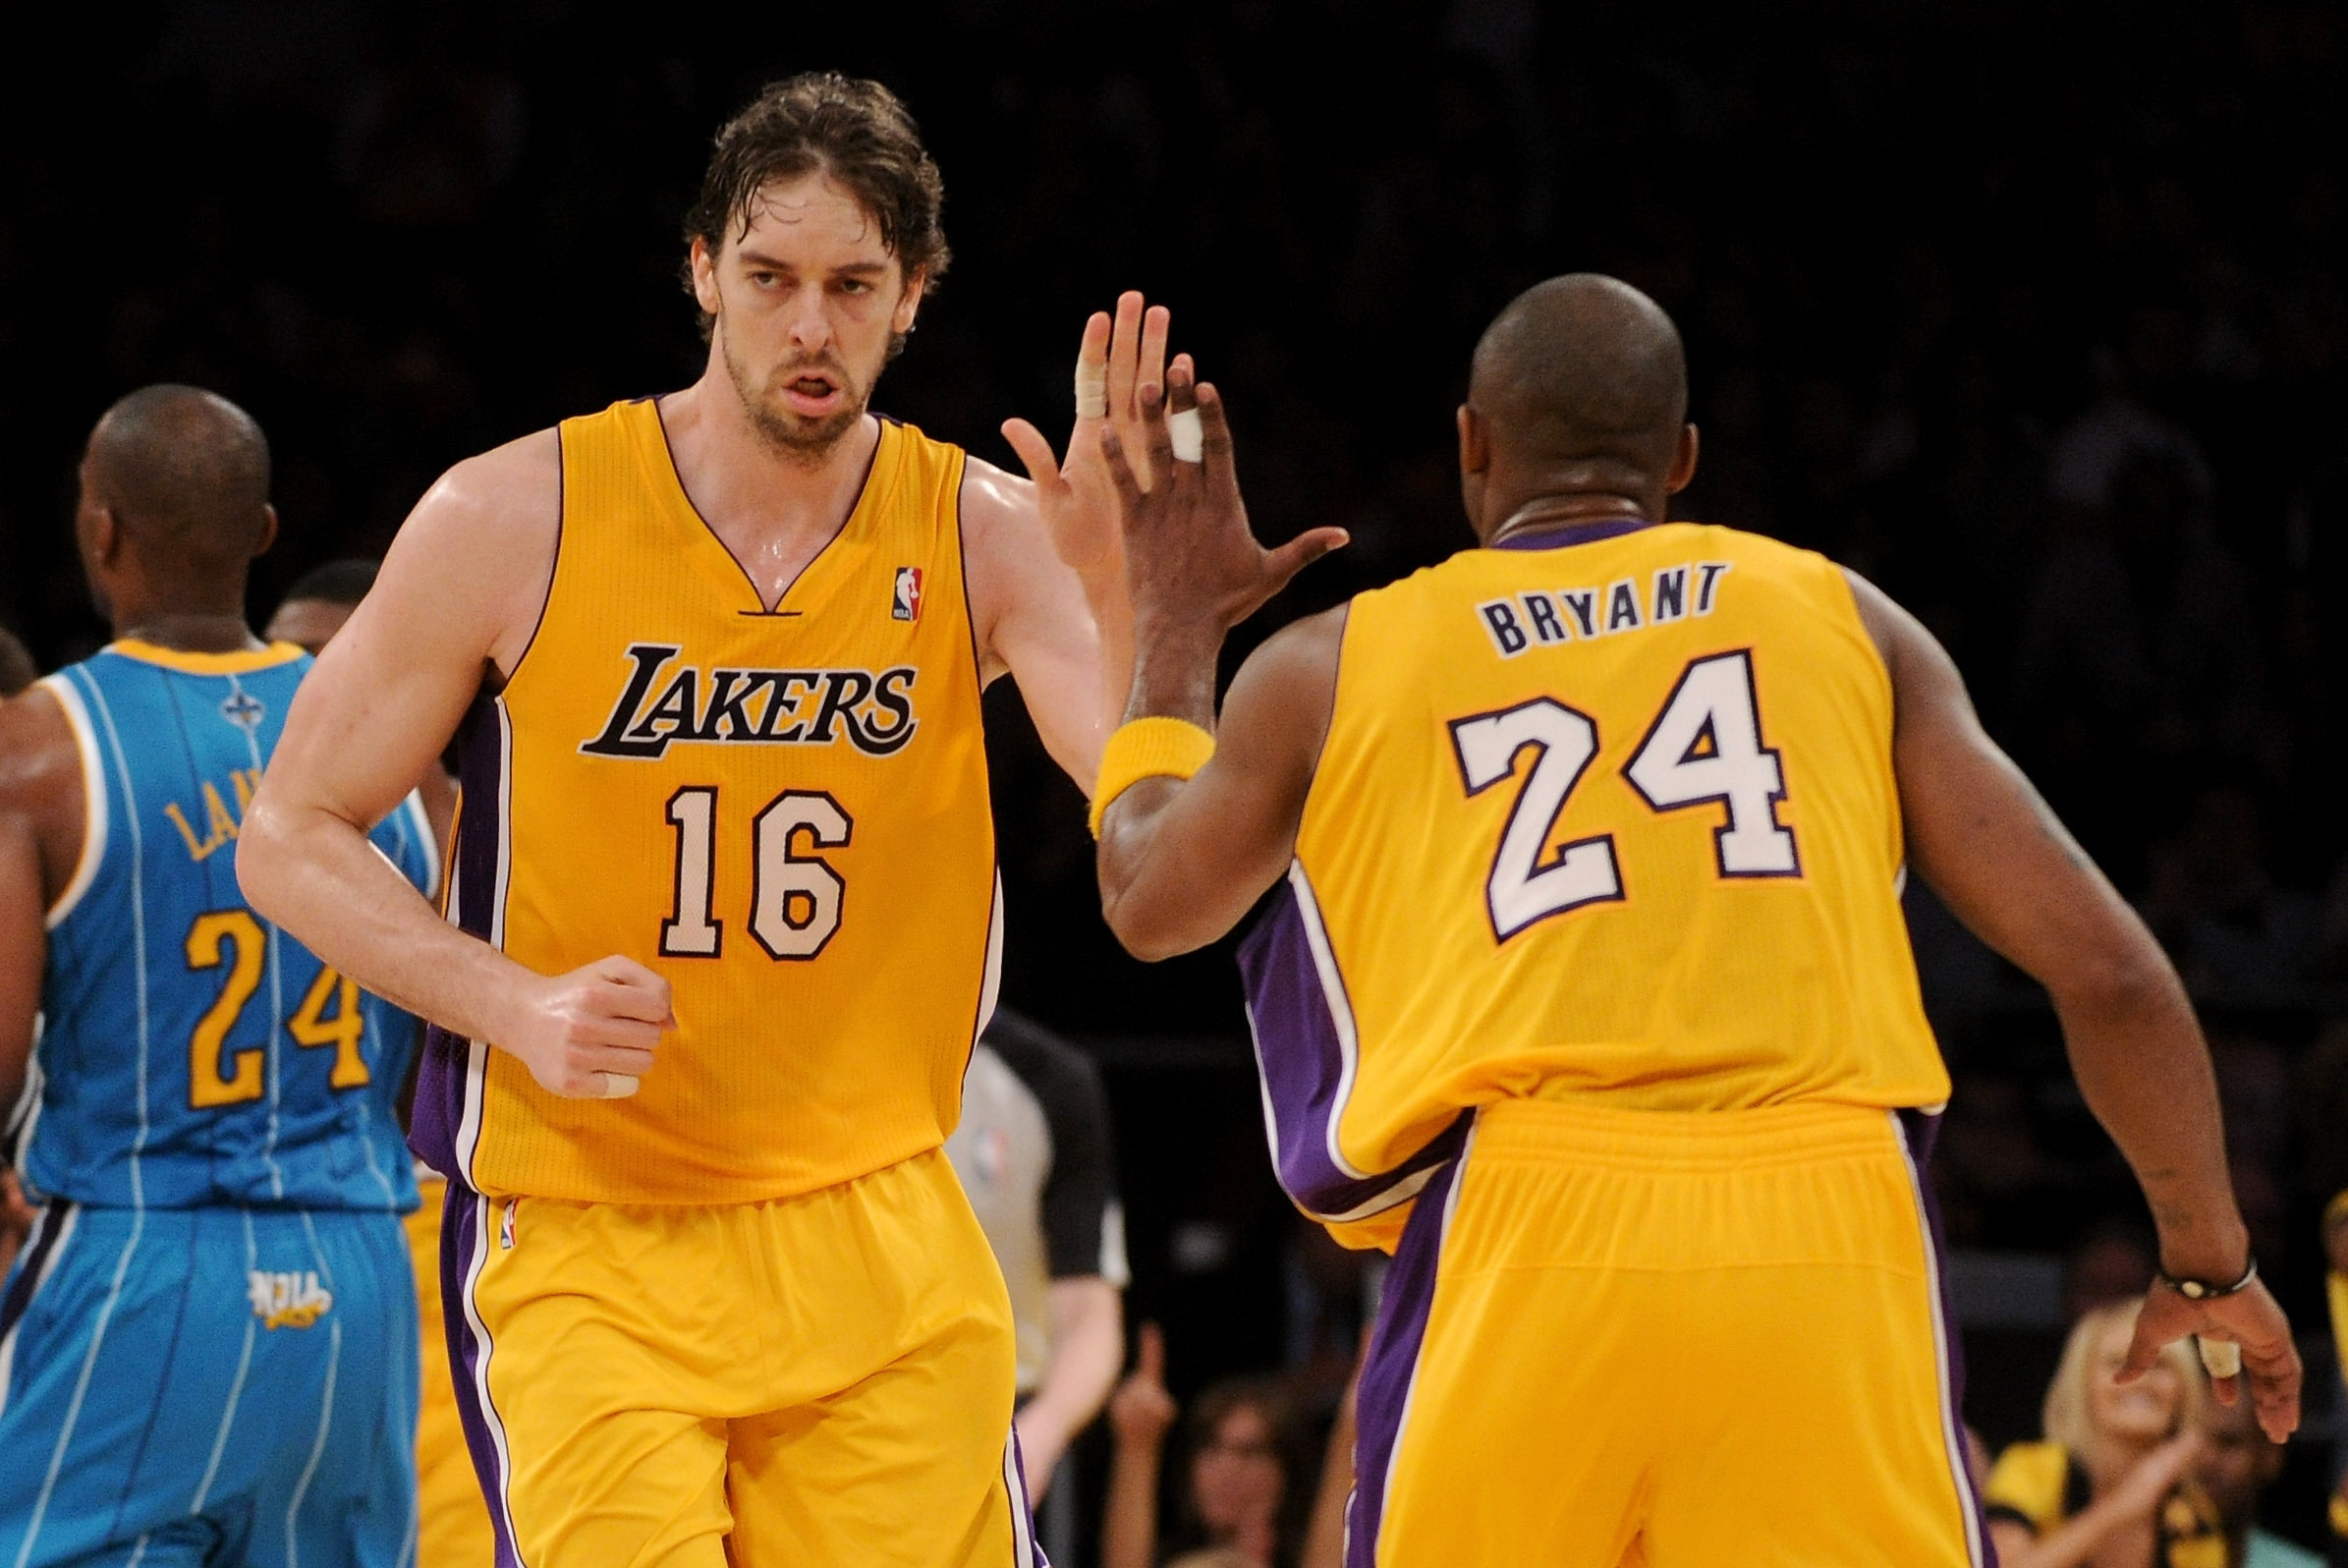 Lakers' future may depend on parting with Bryant